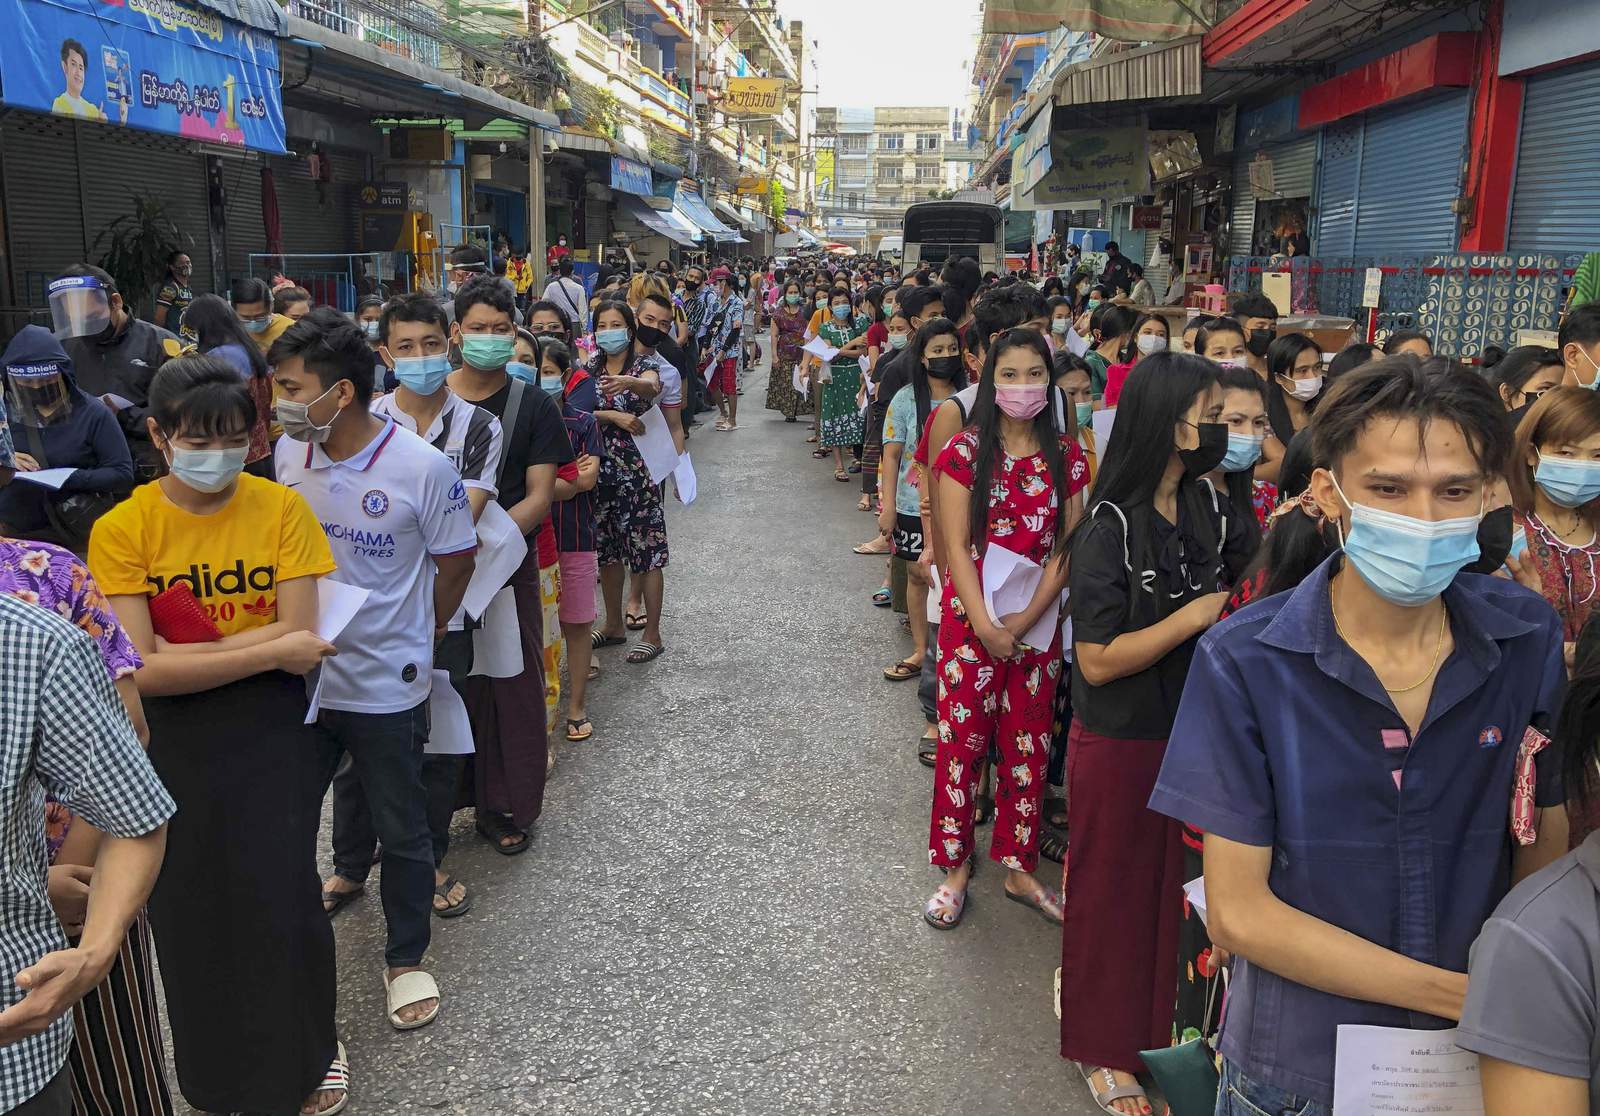 Thousands line up for tests amid Thailand virus outbreak